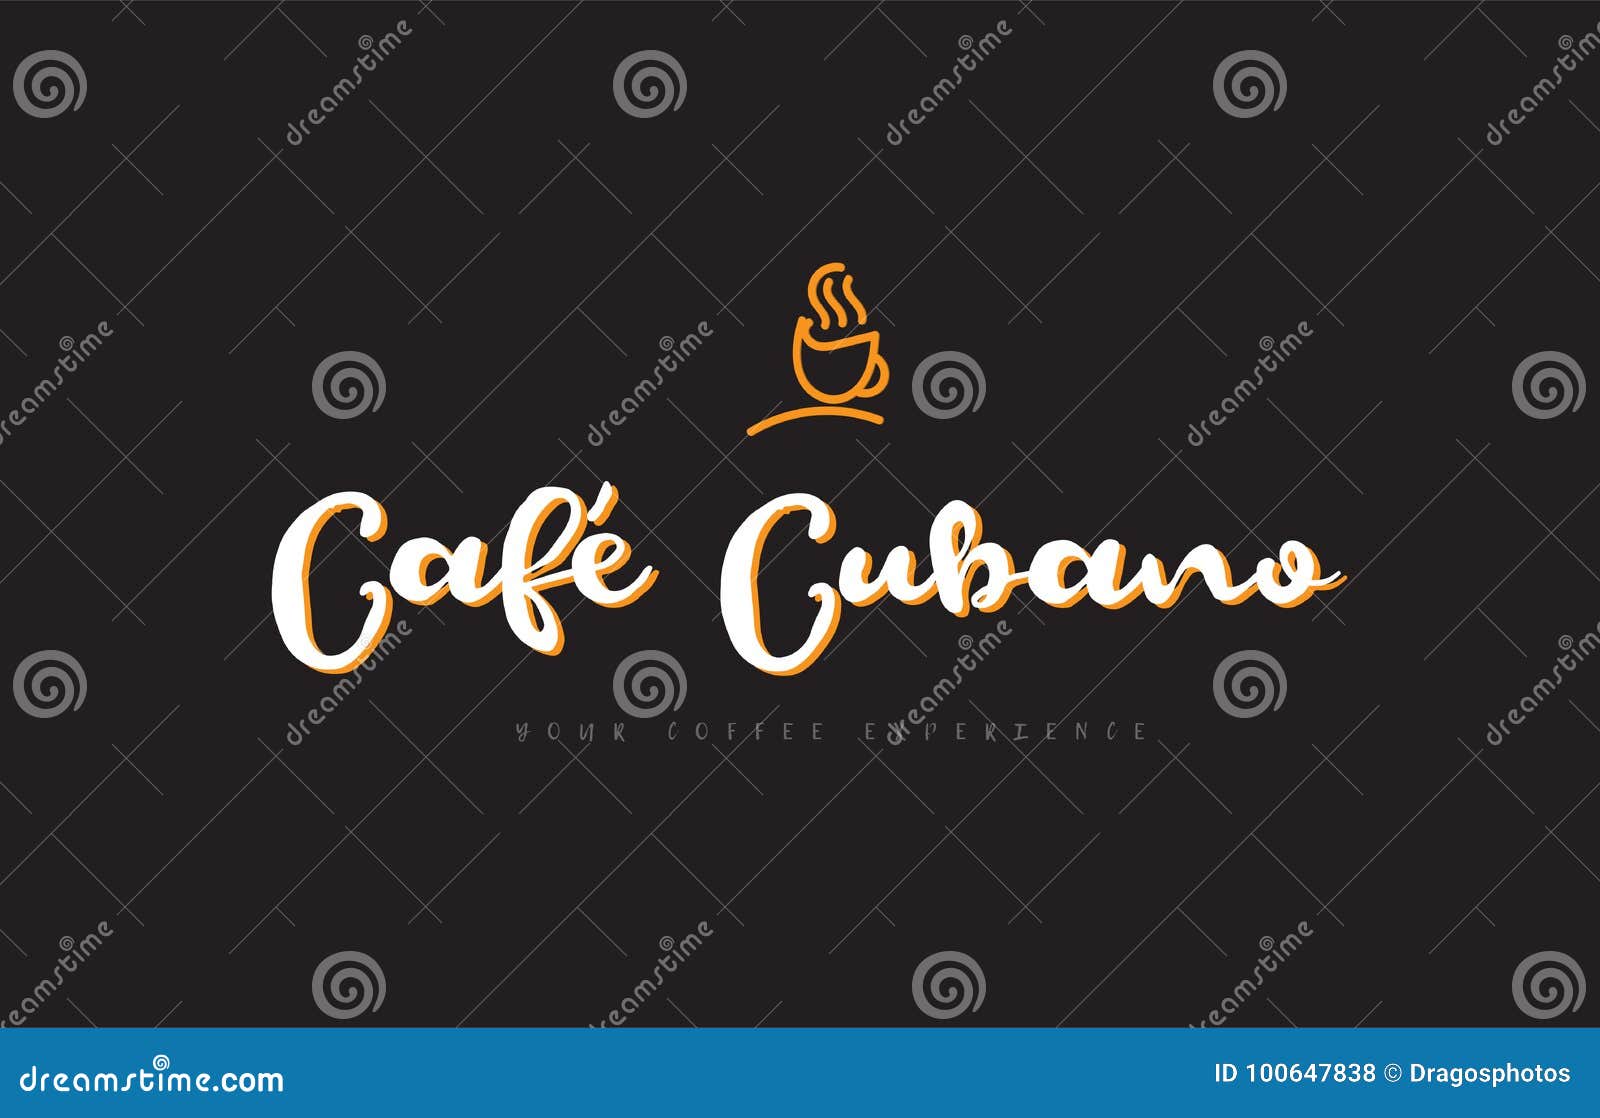 cafe cubano word text logo with coffee cup  idea typography